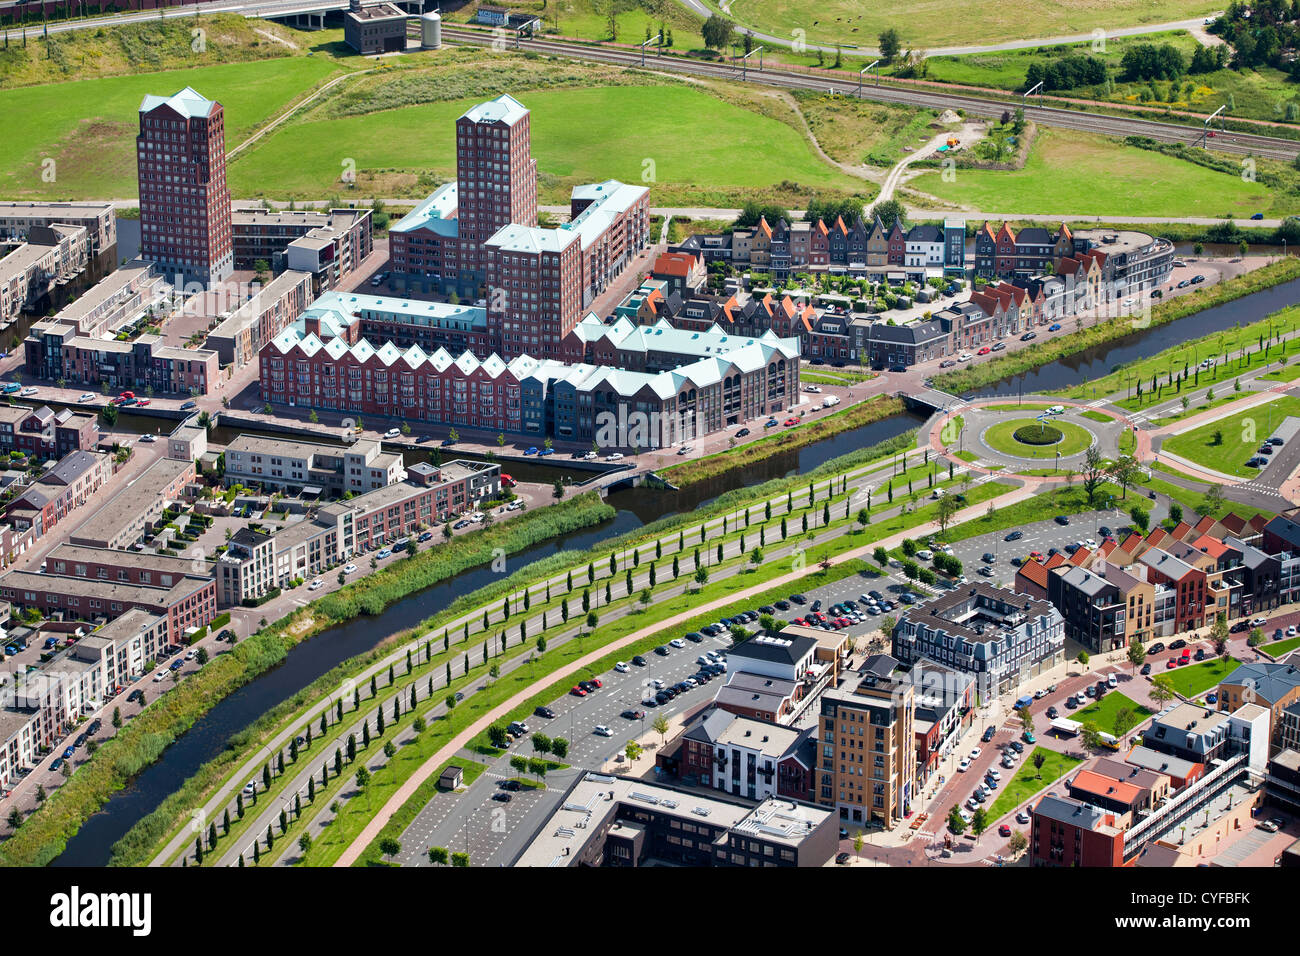 The Netherlands, Amersfoort, residential district called Vathorst. Aerial. Stock Photo